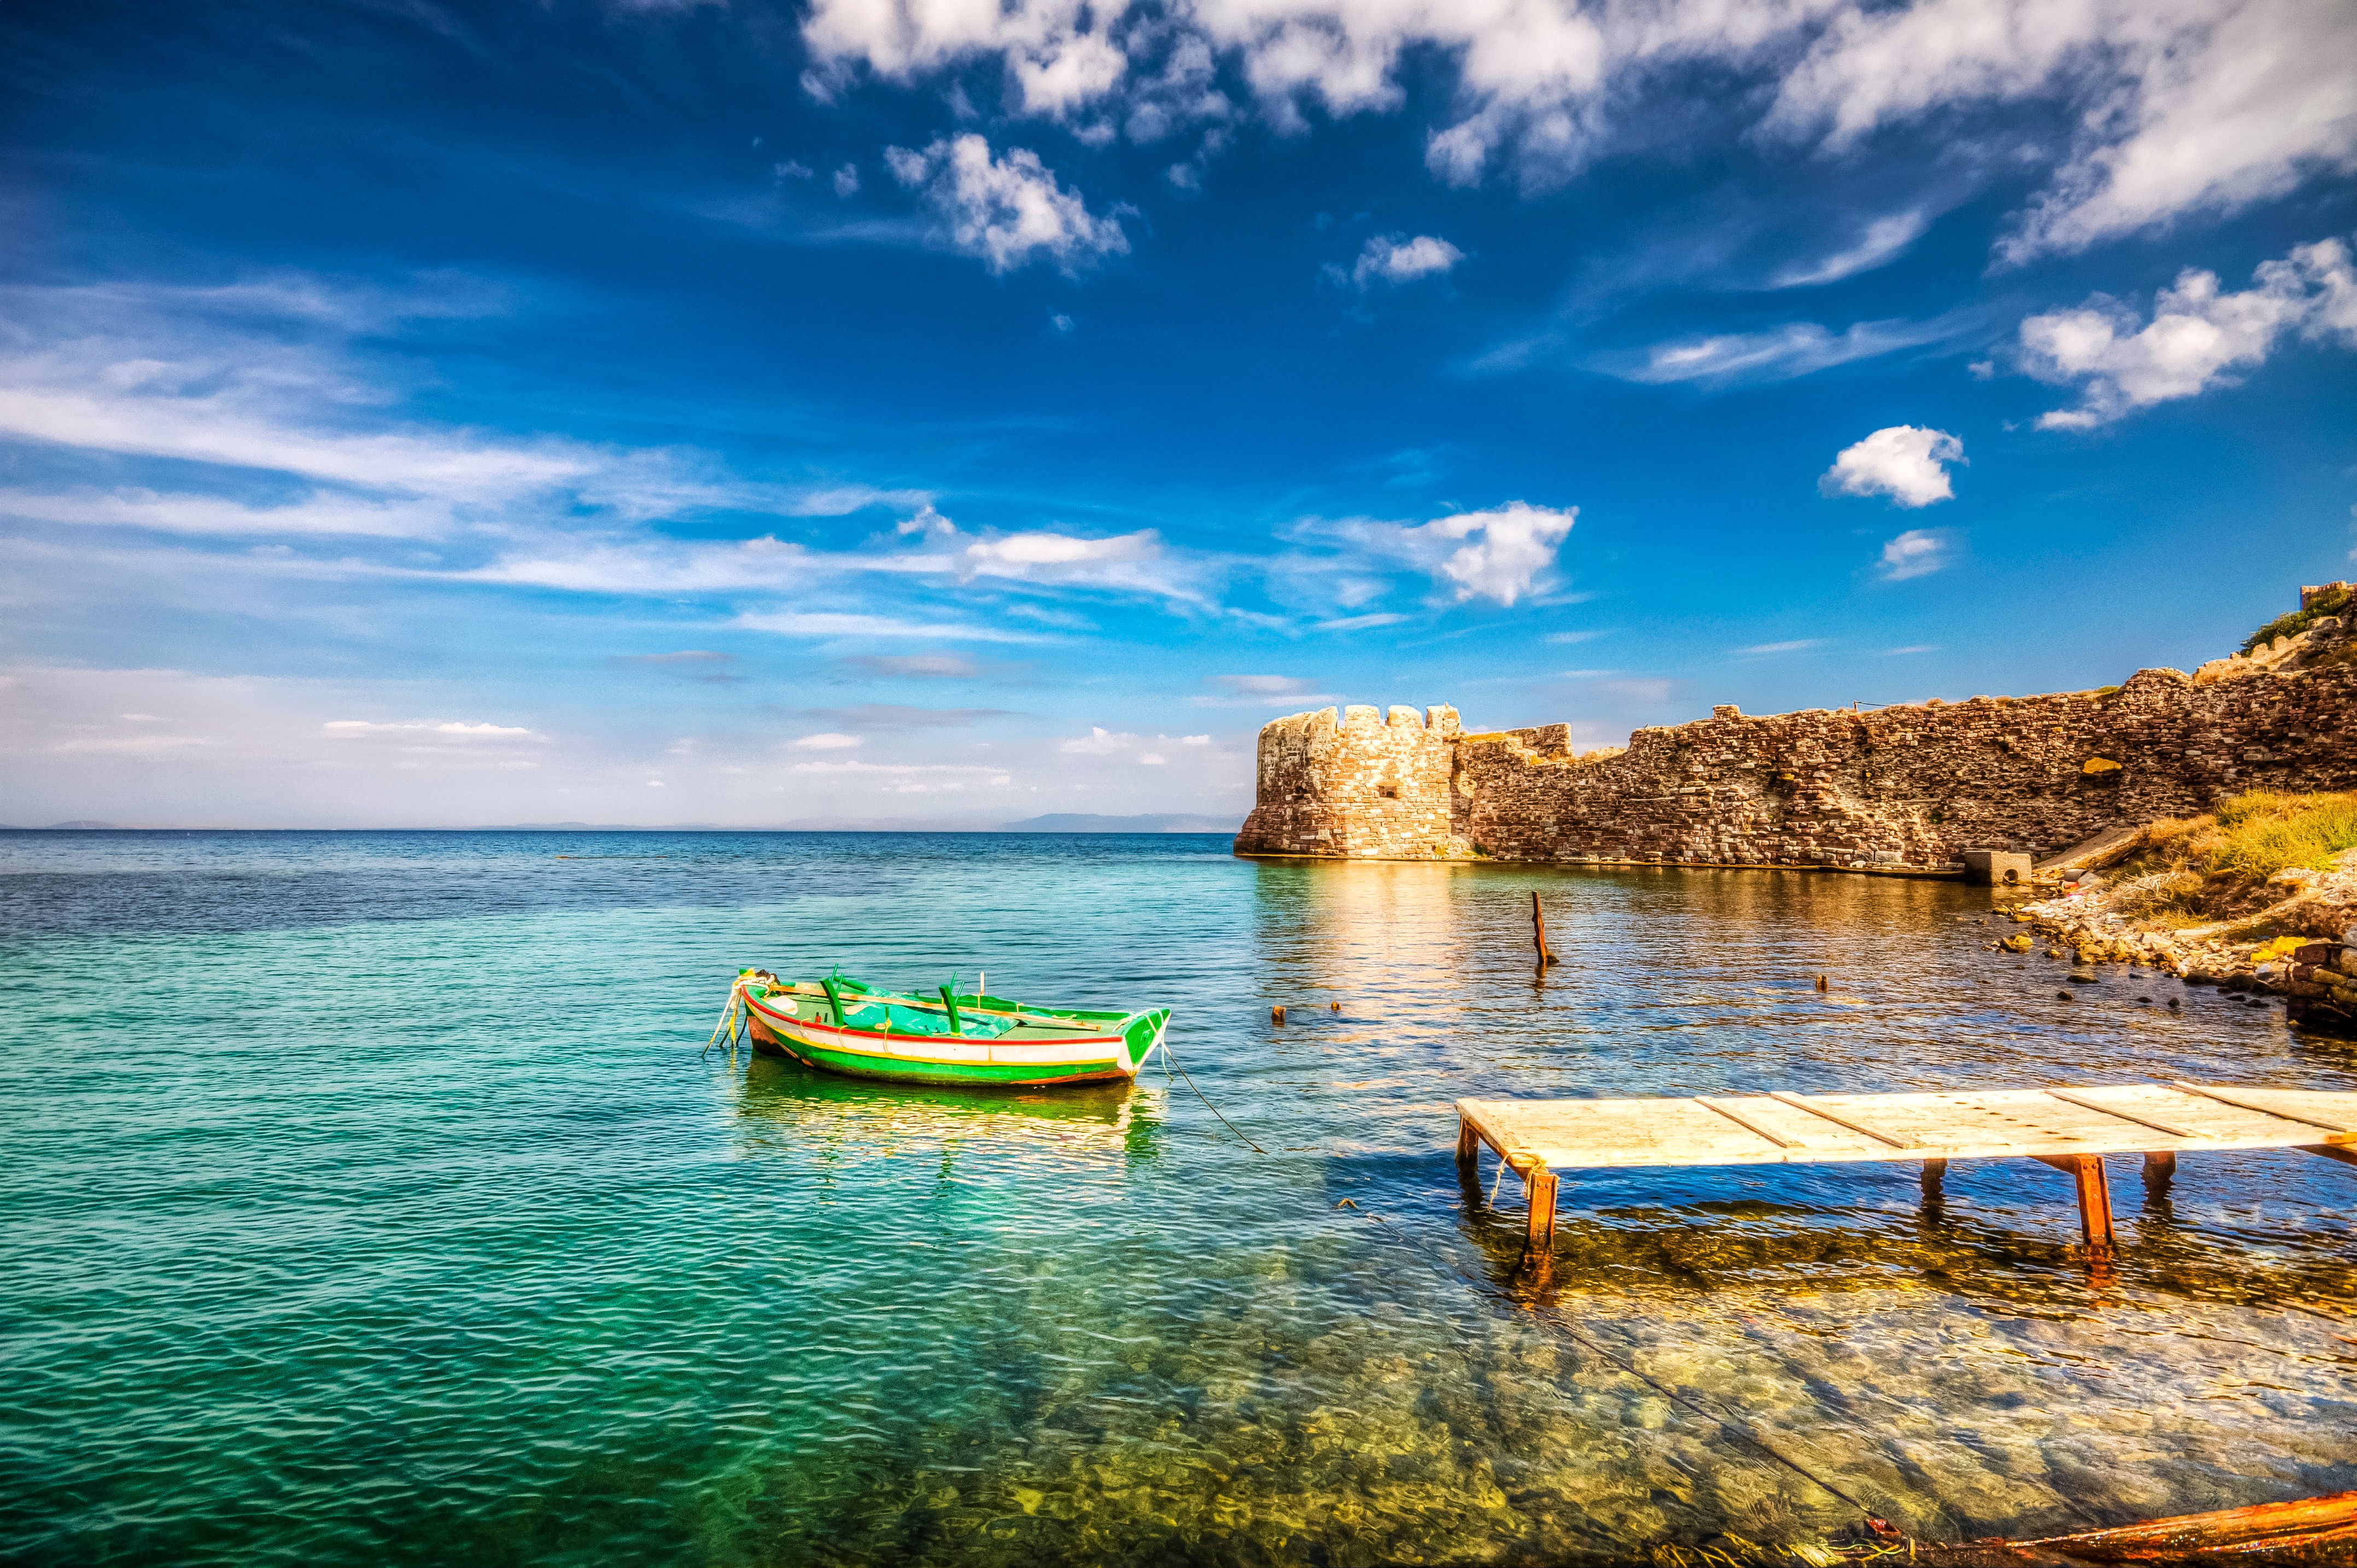 Lesvos Island, where a Greek grandfather took his descendants to show them their roots. Photo: Shutterstock